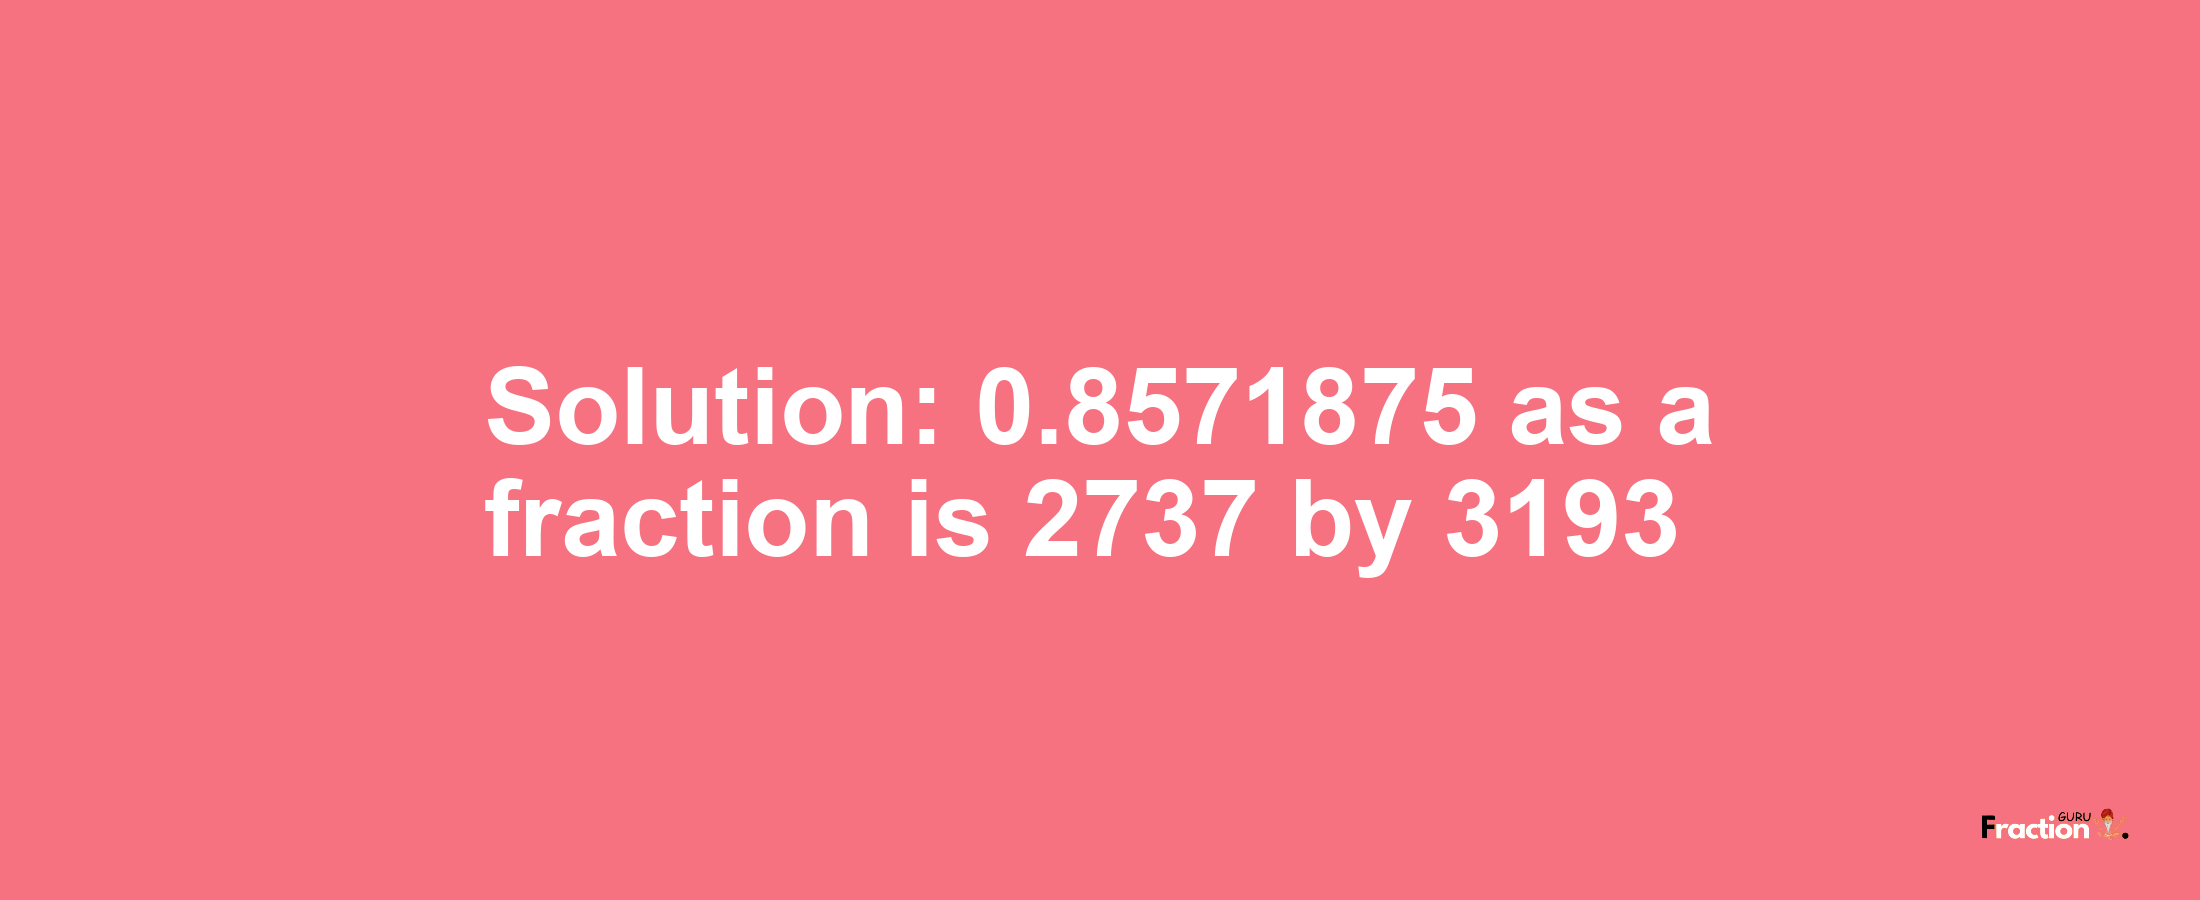 Solution:0.8571875 as a fraction is 2737/3193